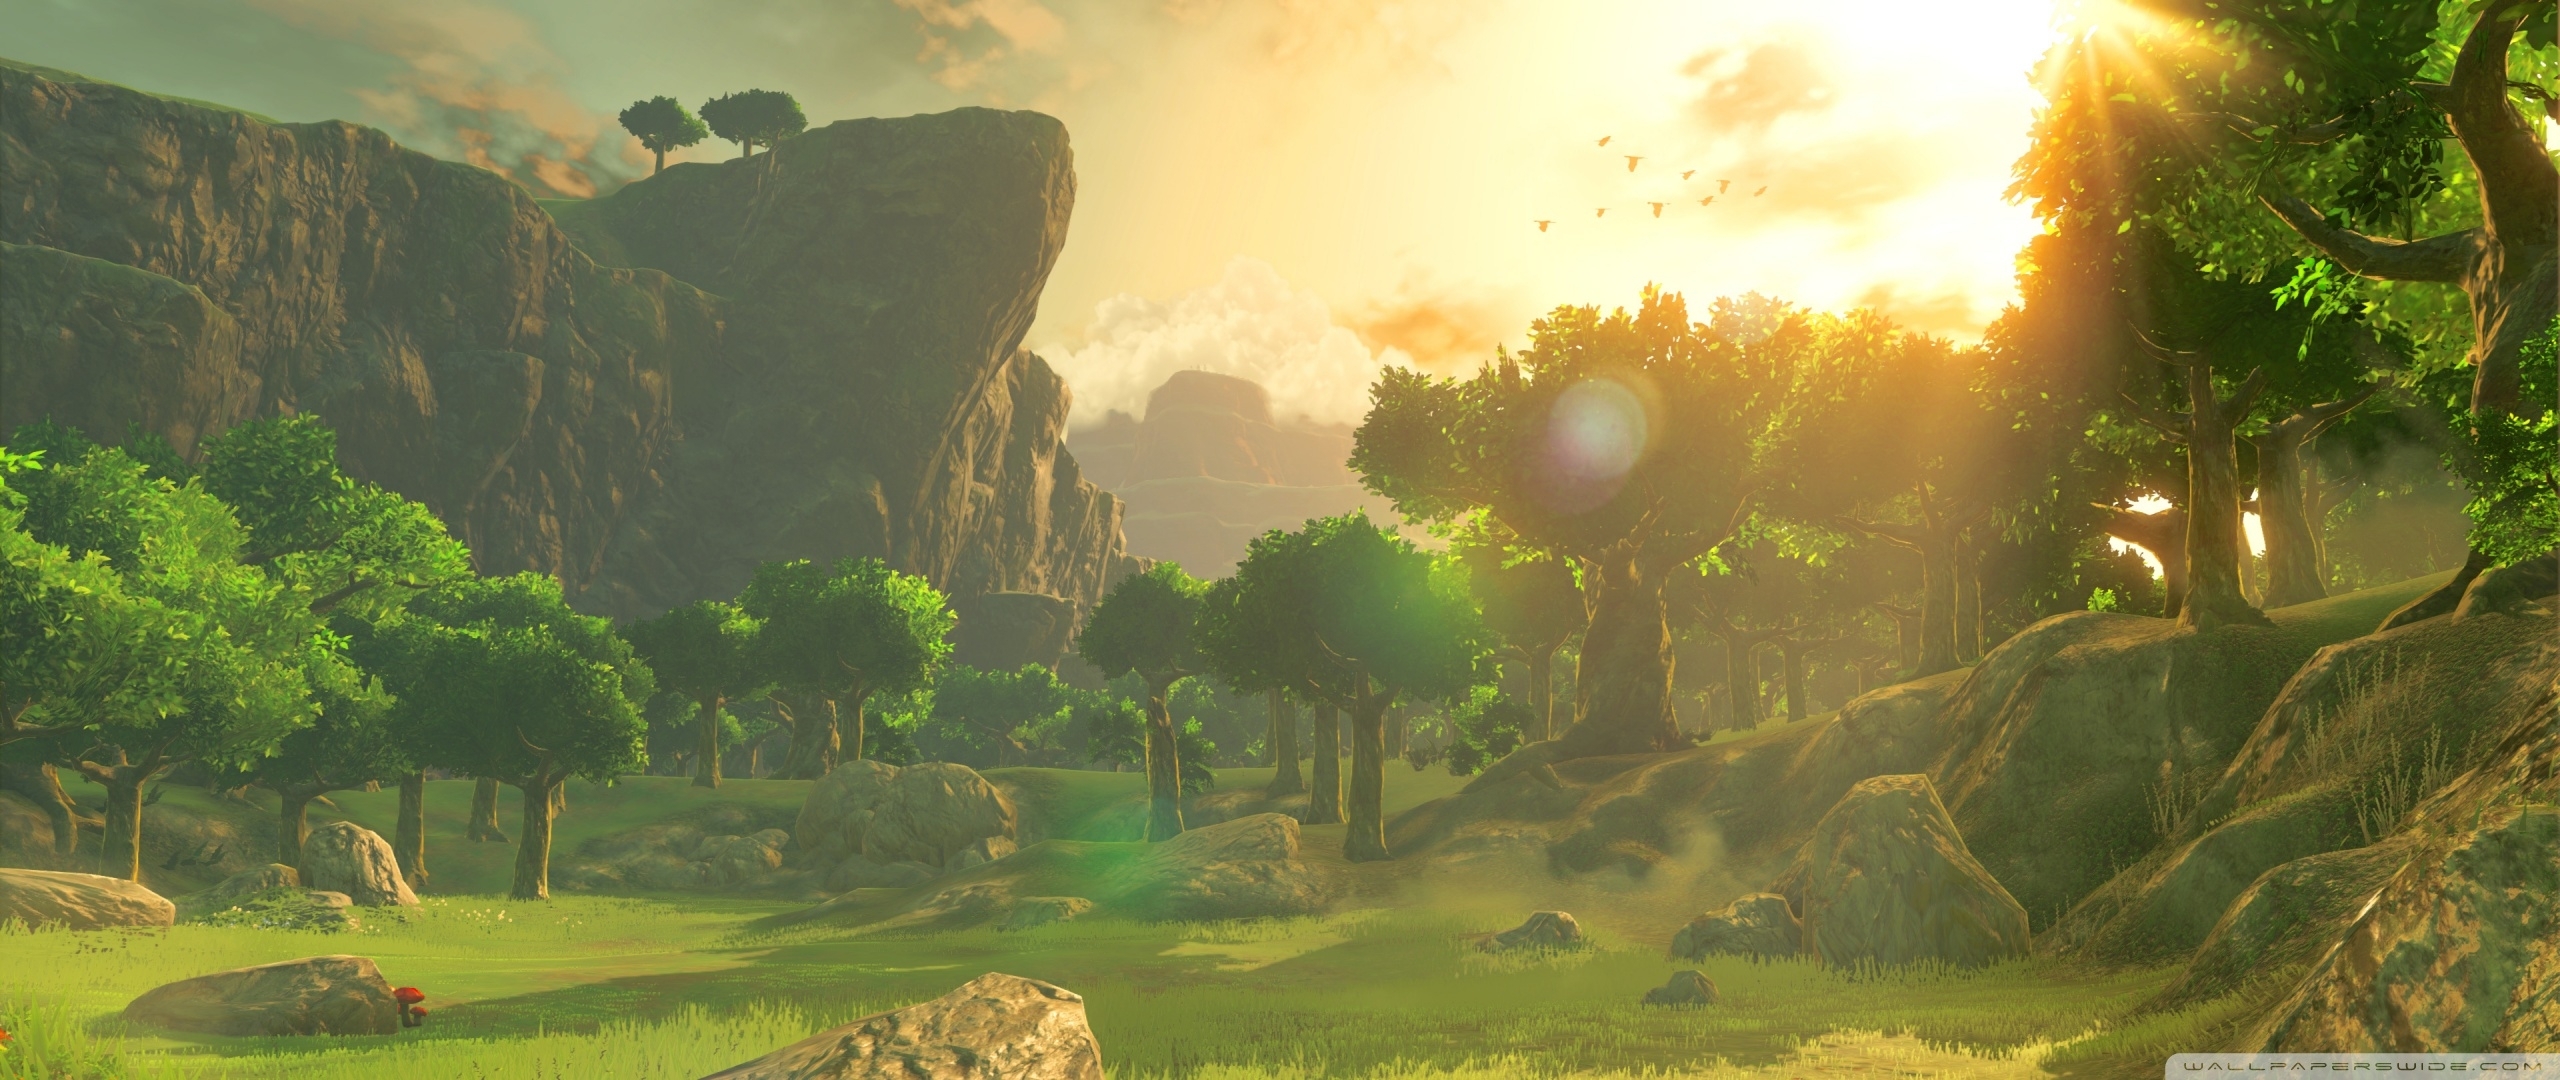 10 New Breath Of The Wild Dual Monitor Wallpaper FULL HD 1080p For PC